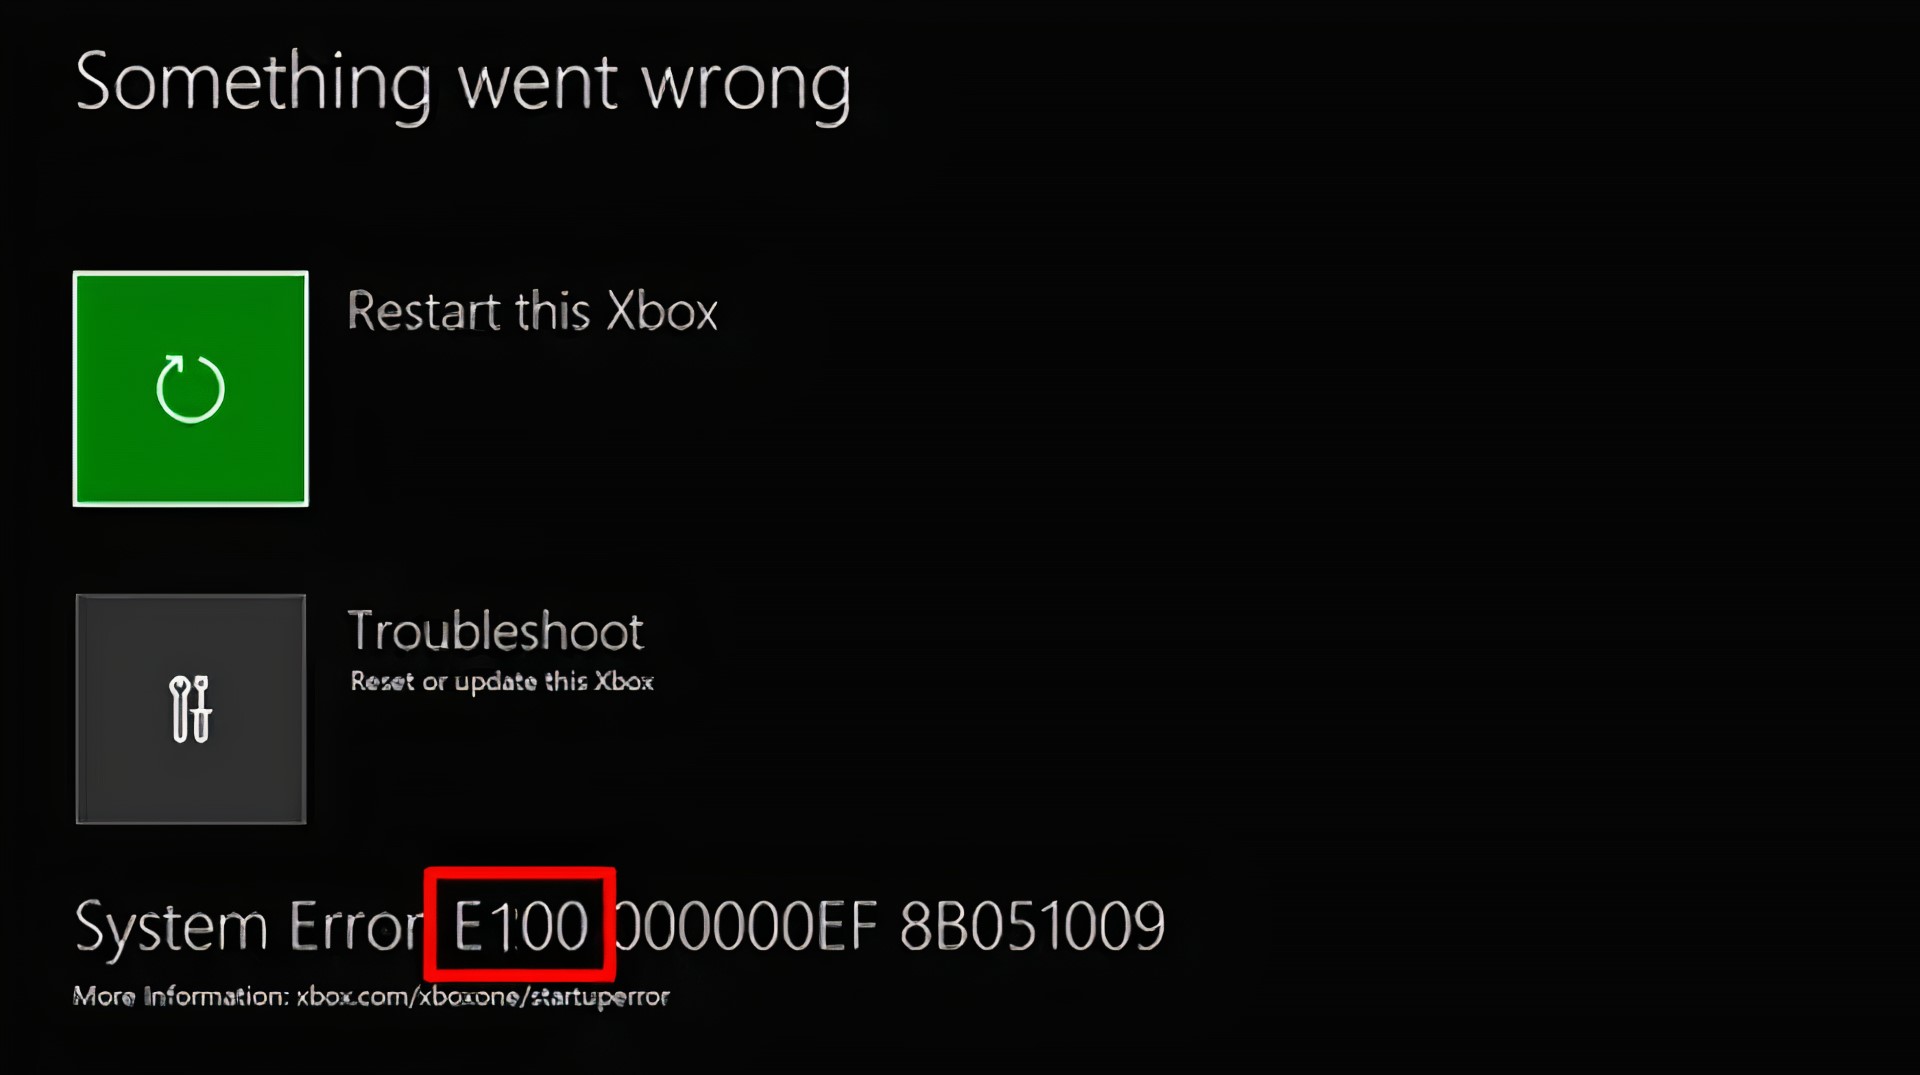 Display message of the Xbox One error code E100